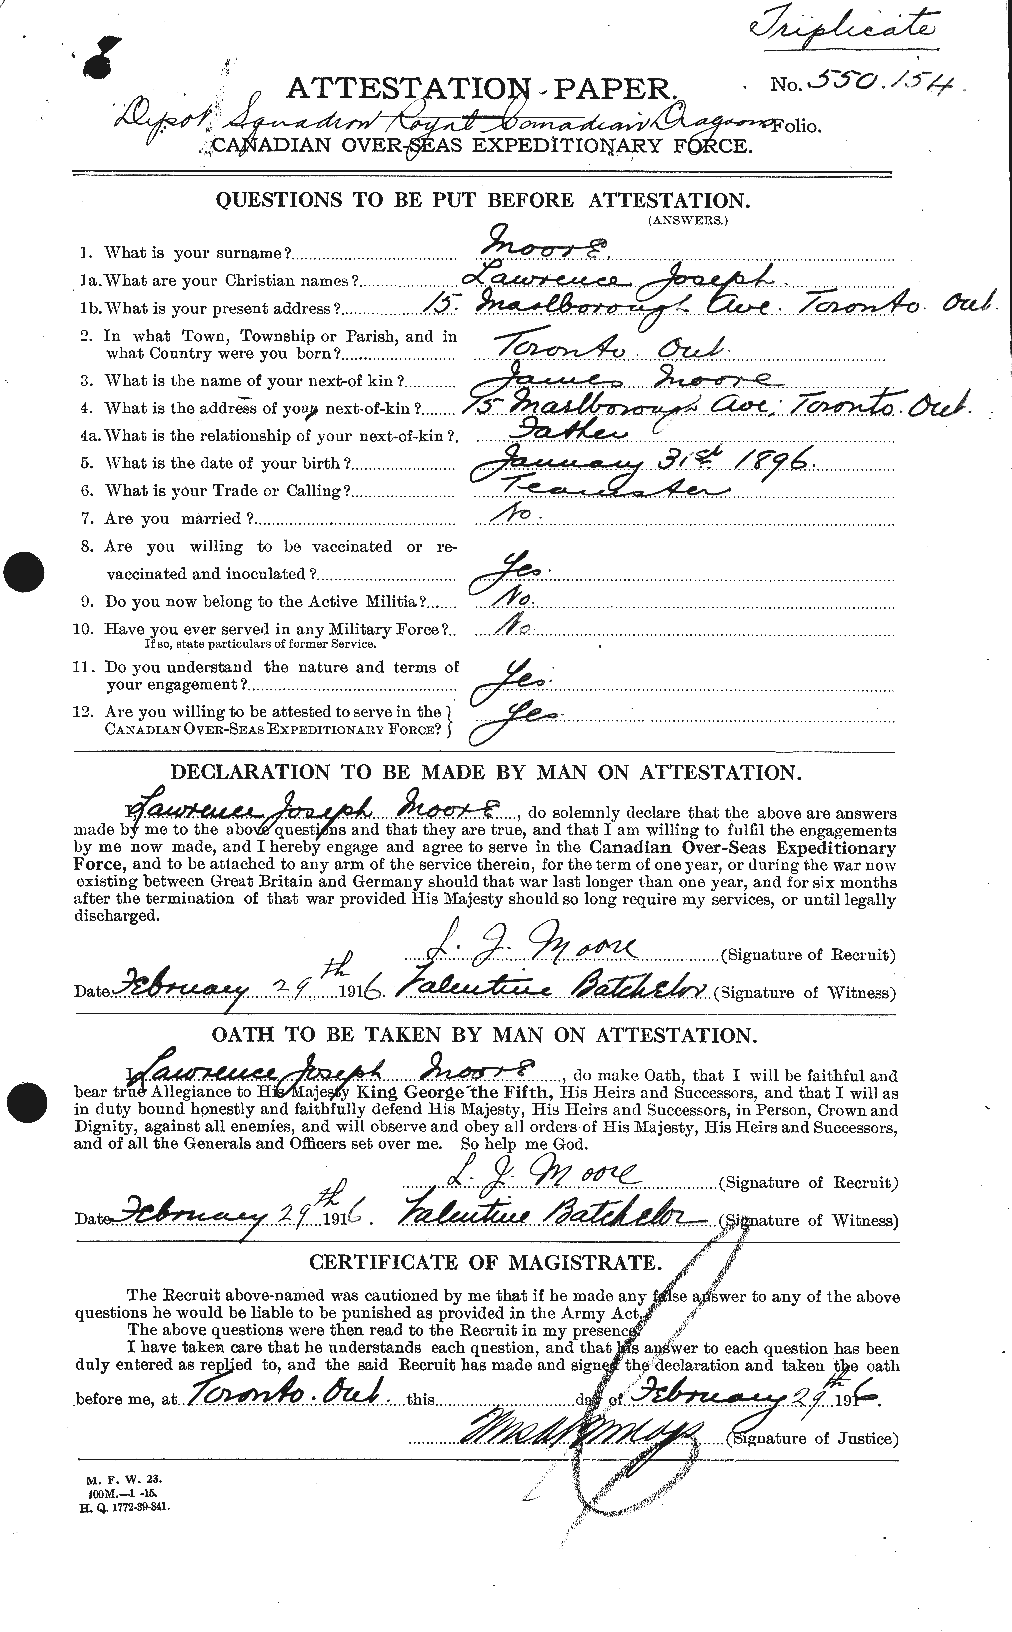 Personnel Records of the First World War - CEF 503396a